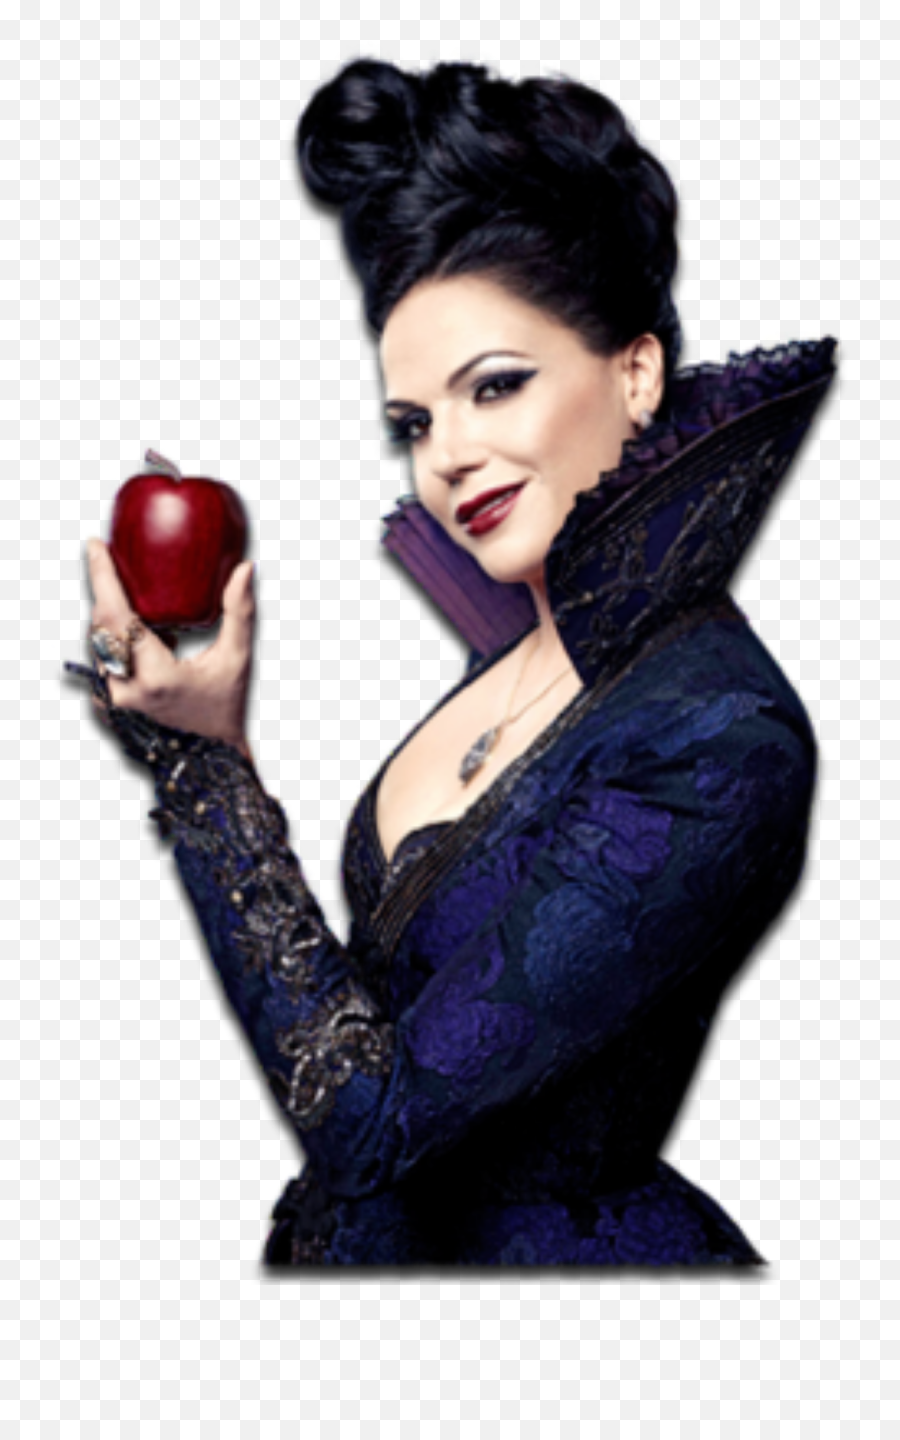 Regina Evil Queen Sticker - Once Upon A Time Personnage The Evil Queen Emoji,Evil Queen Emoji